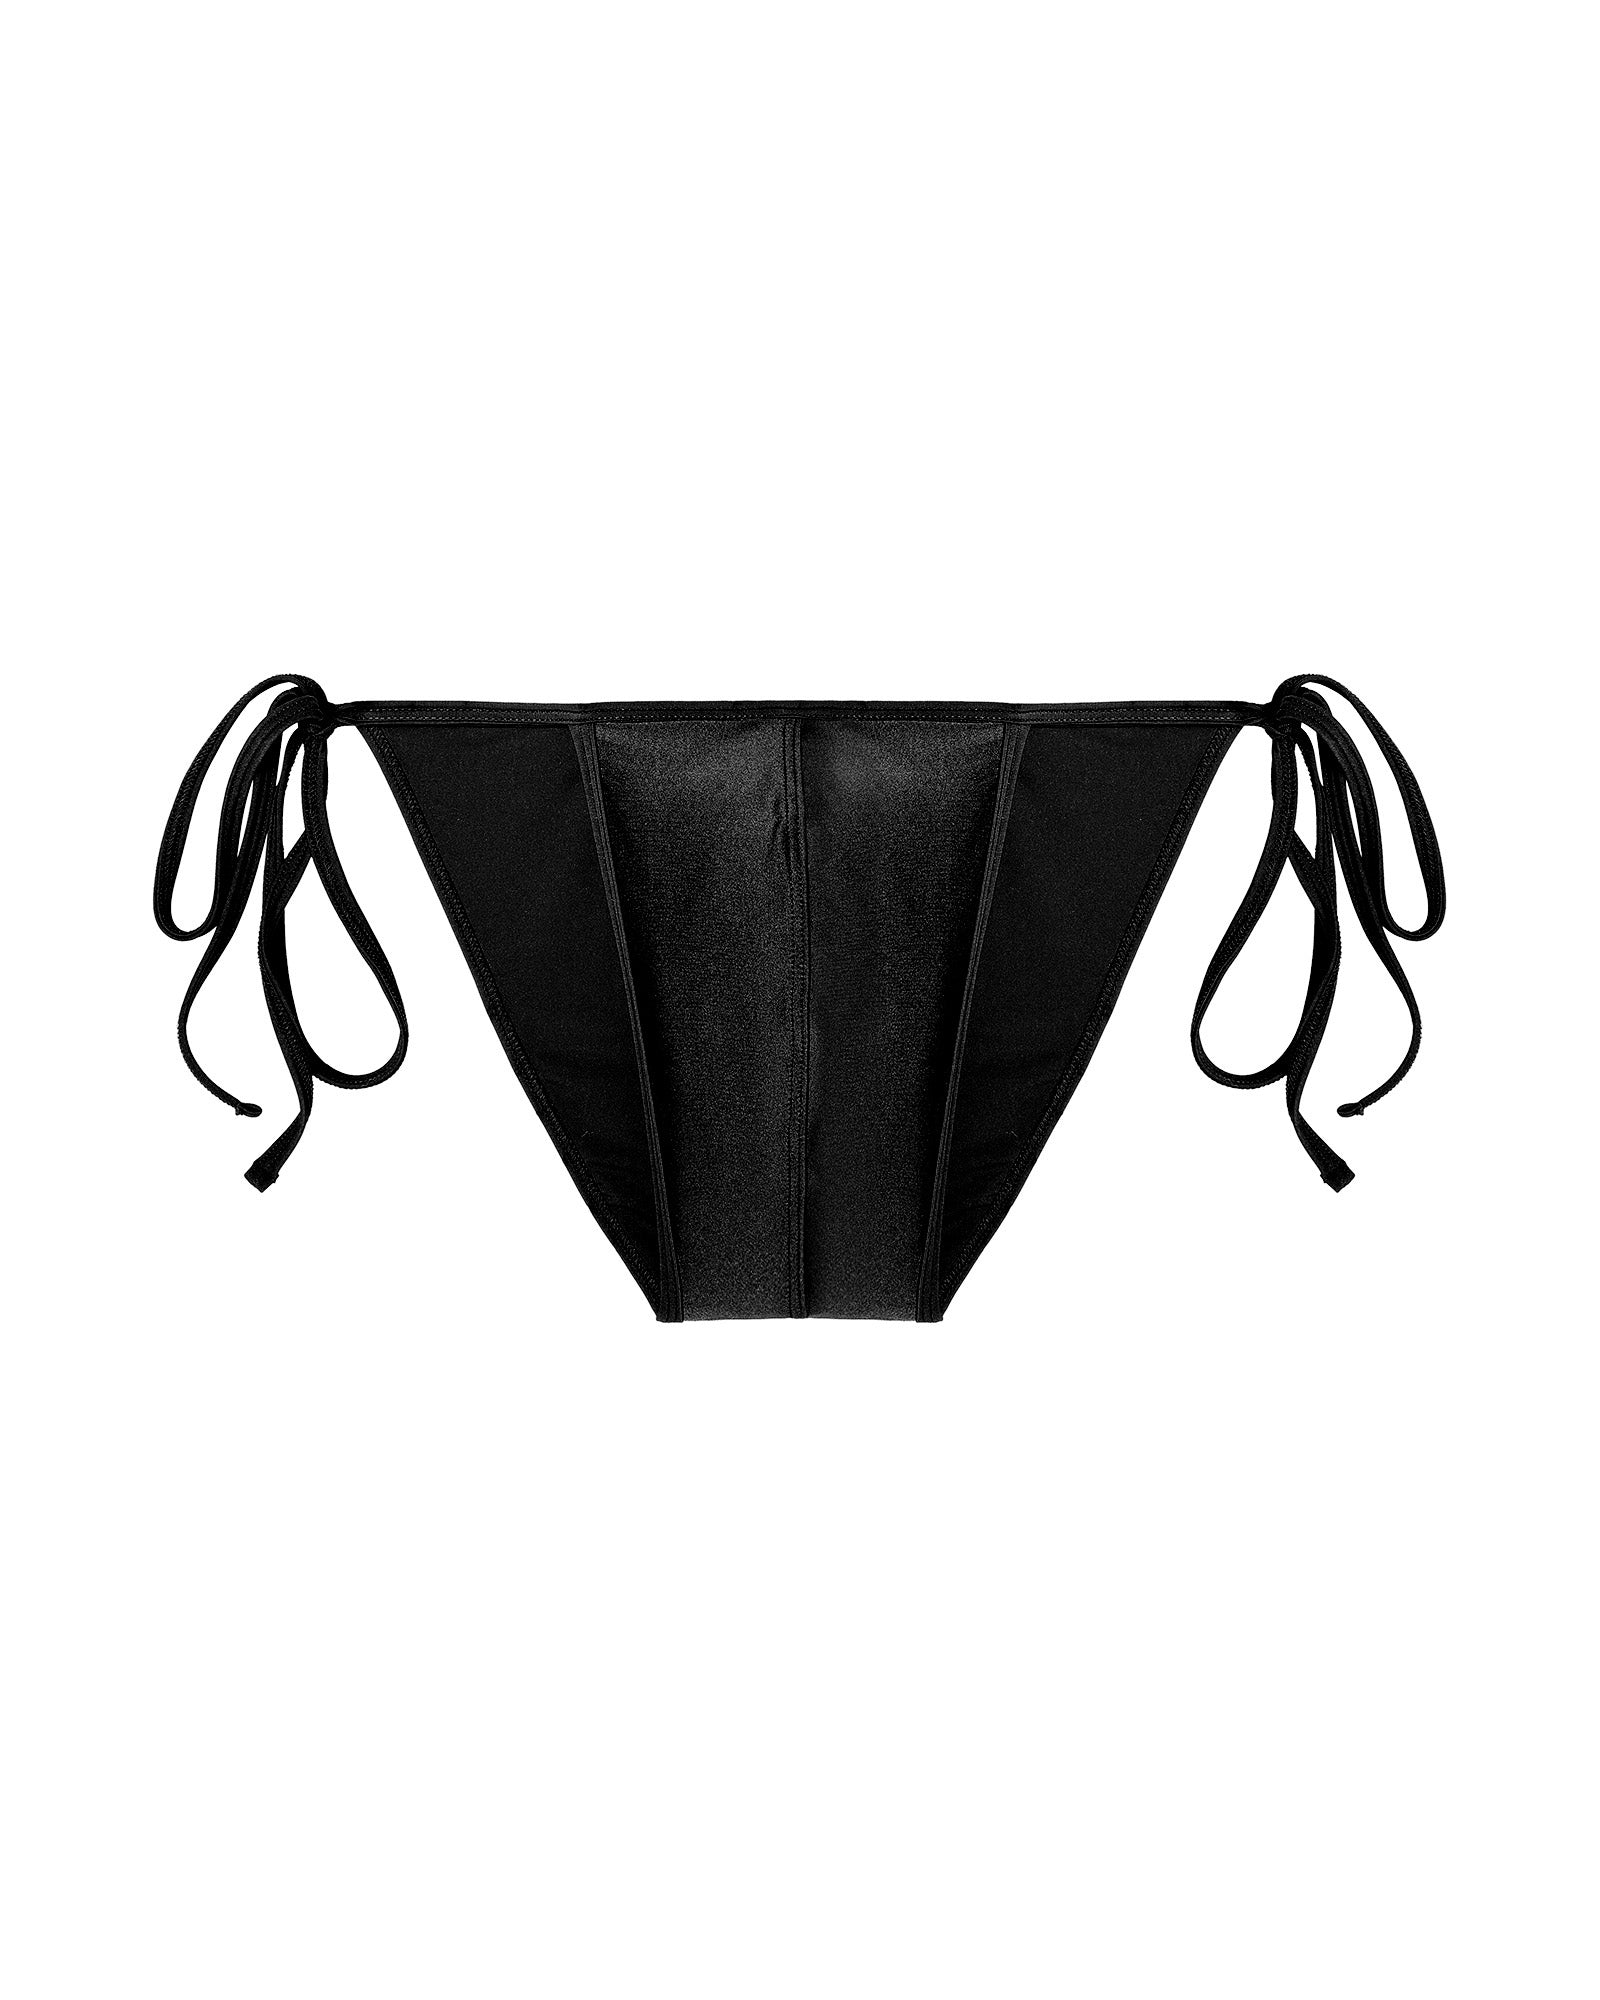 Mens Smooth/Flat Front, G-String thong with side ties in gold